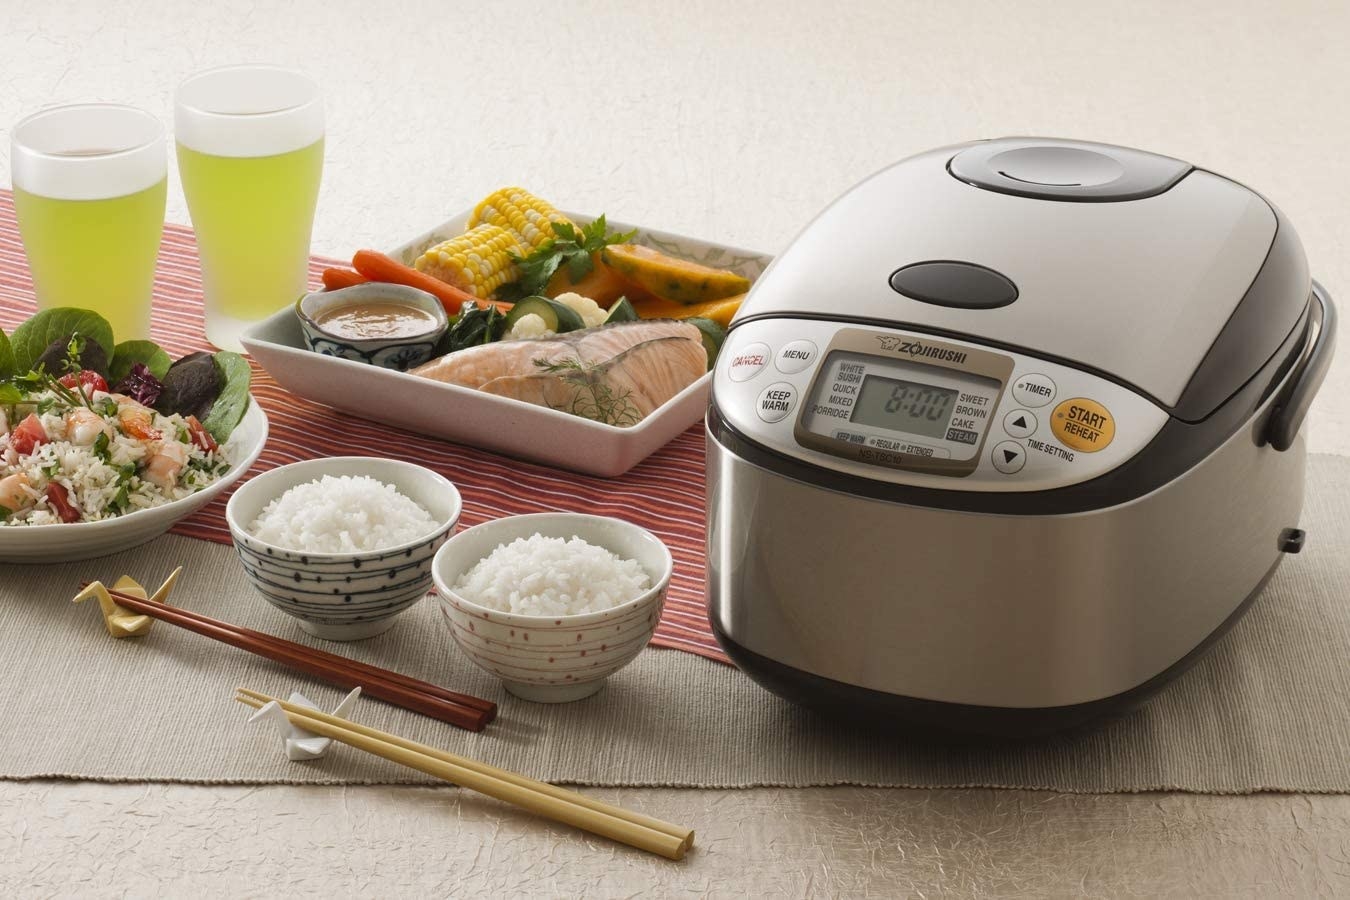 The rice cooker with a set meal